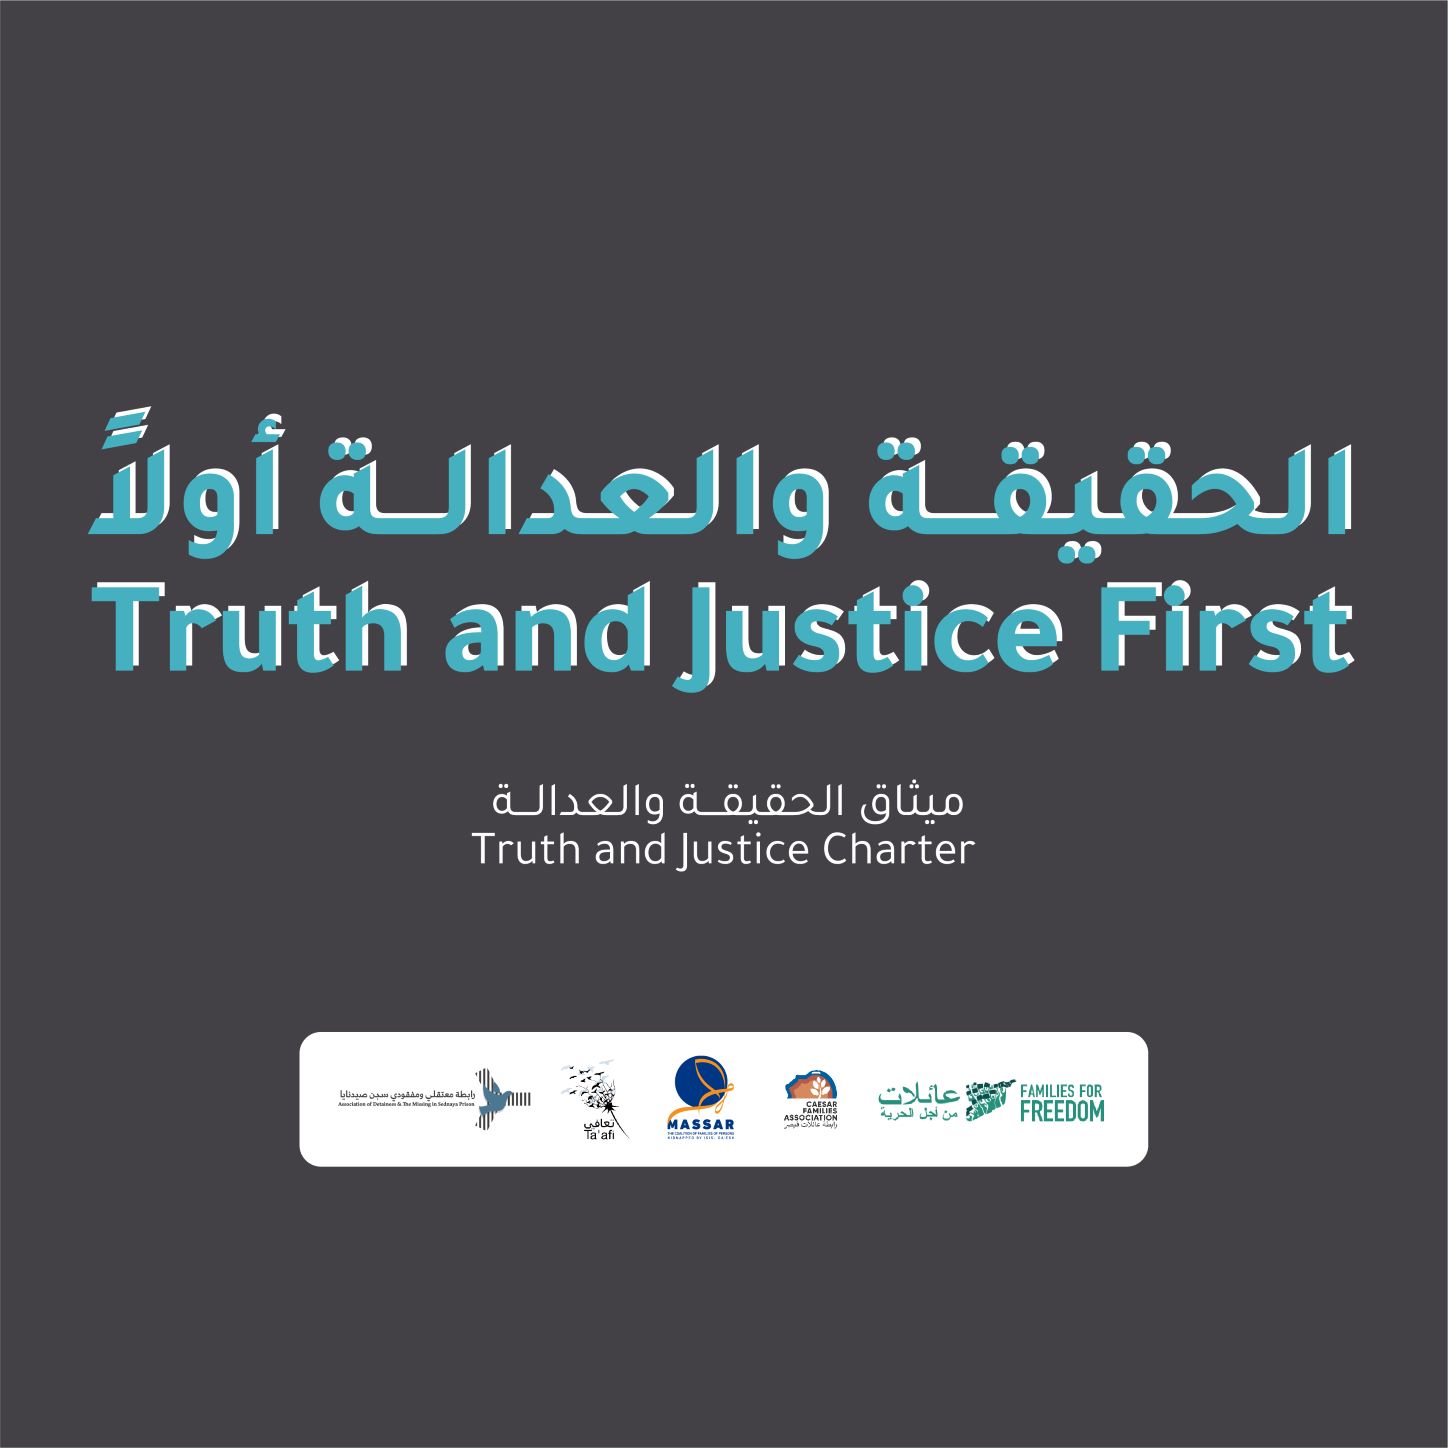 The Truth and Justice Charter